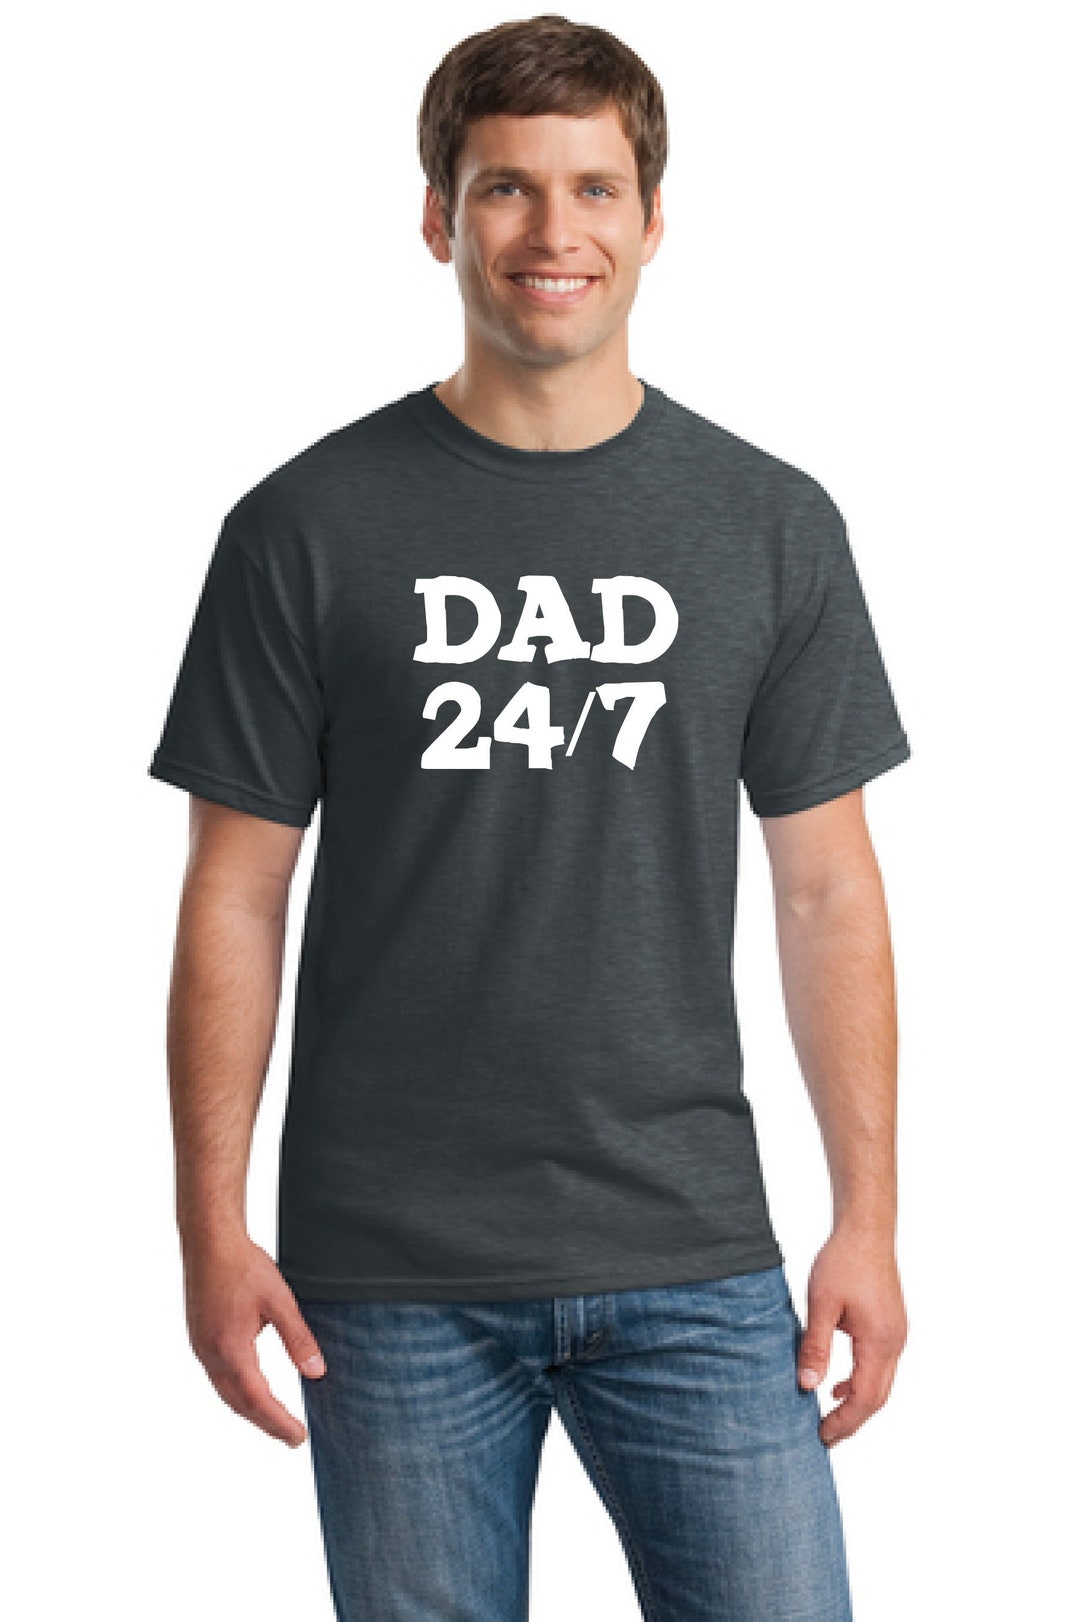 Gift Husband-gift Dad father T-shirt gift for Dad-dad 24/7 - Etsy